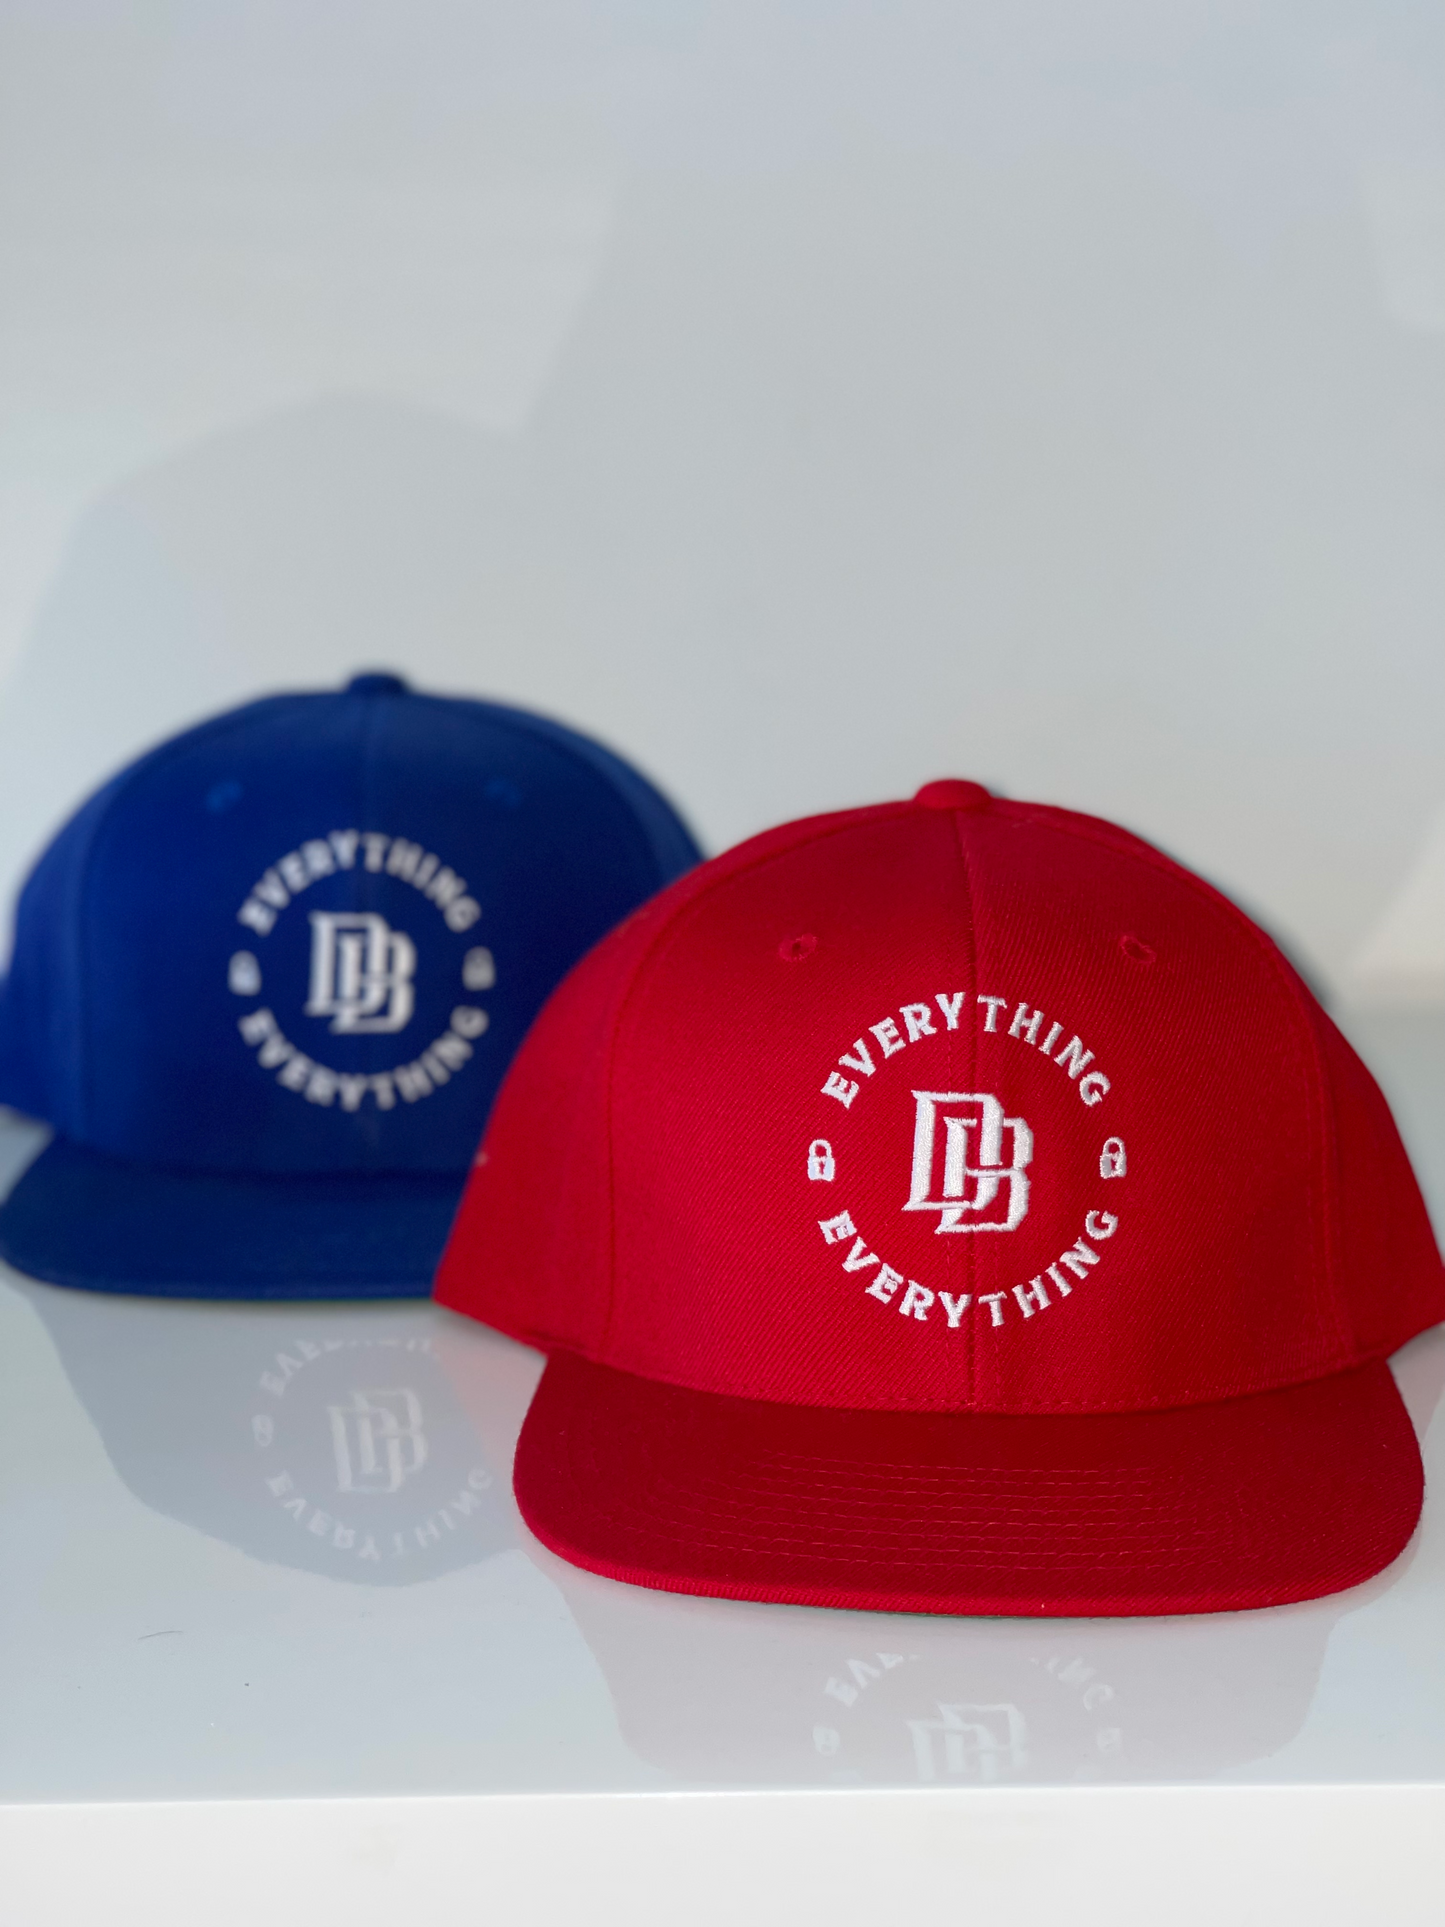 SIGNATURE EVERYTHING DB SNAPBACK RED LIMTED EDITION